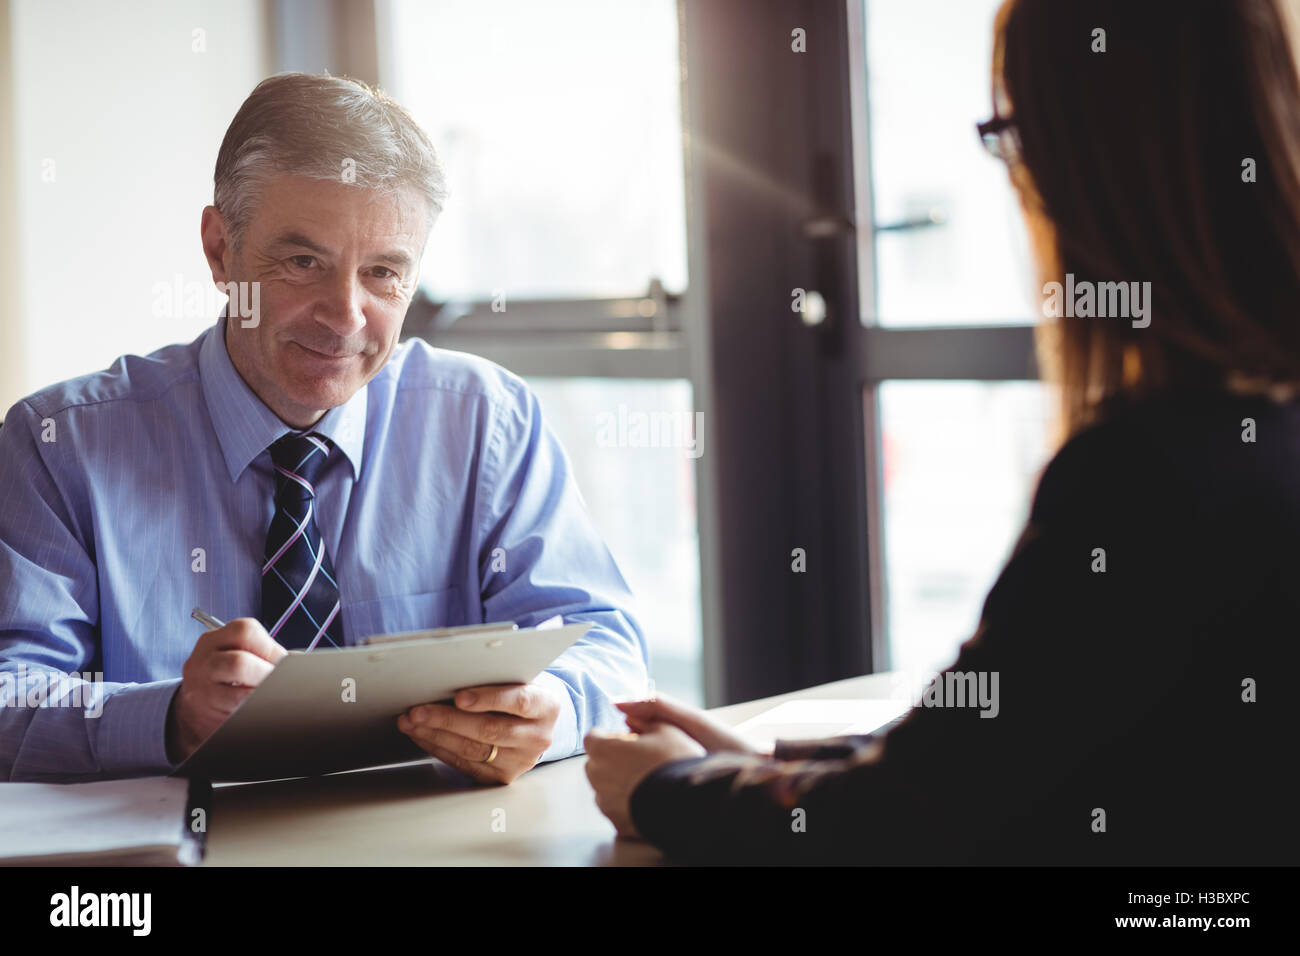 Businessman into discussion with colleague Stock Photo